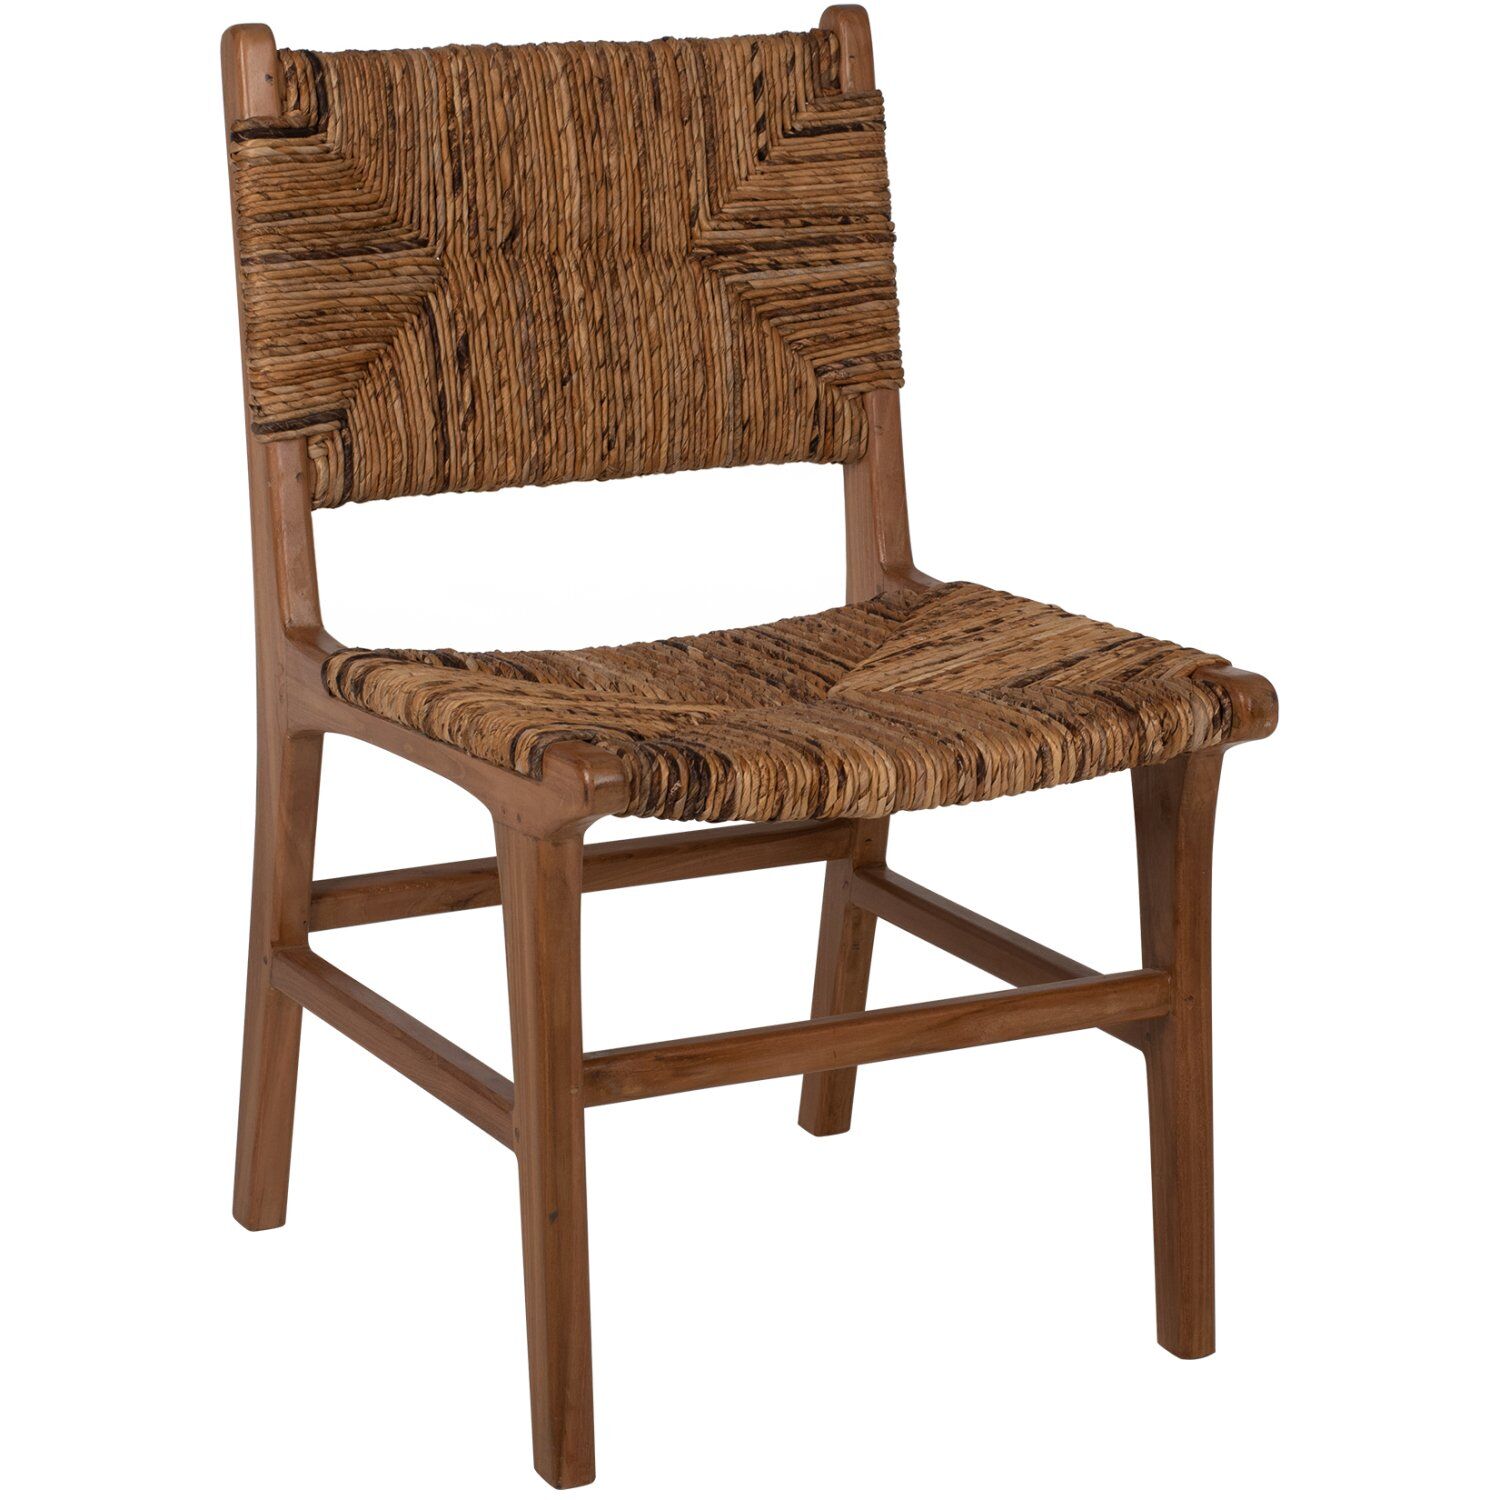 CHAIR HM9399.11 TEAK WOOD WITH STRAW MATTING ON BACKREST AND SEAT NATURAL COLOR 51x60,5x88Hcm